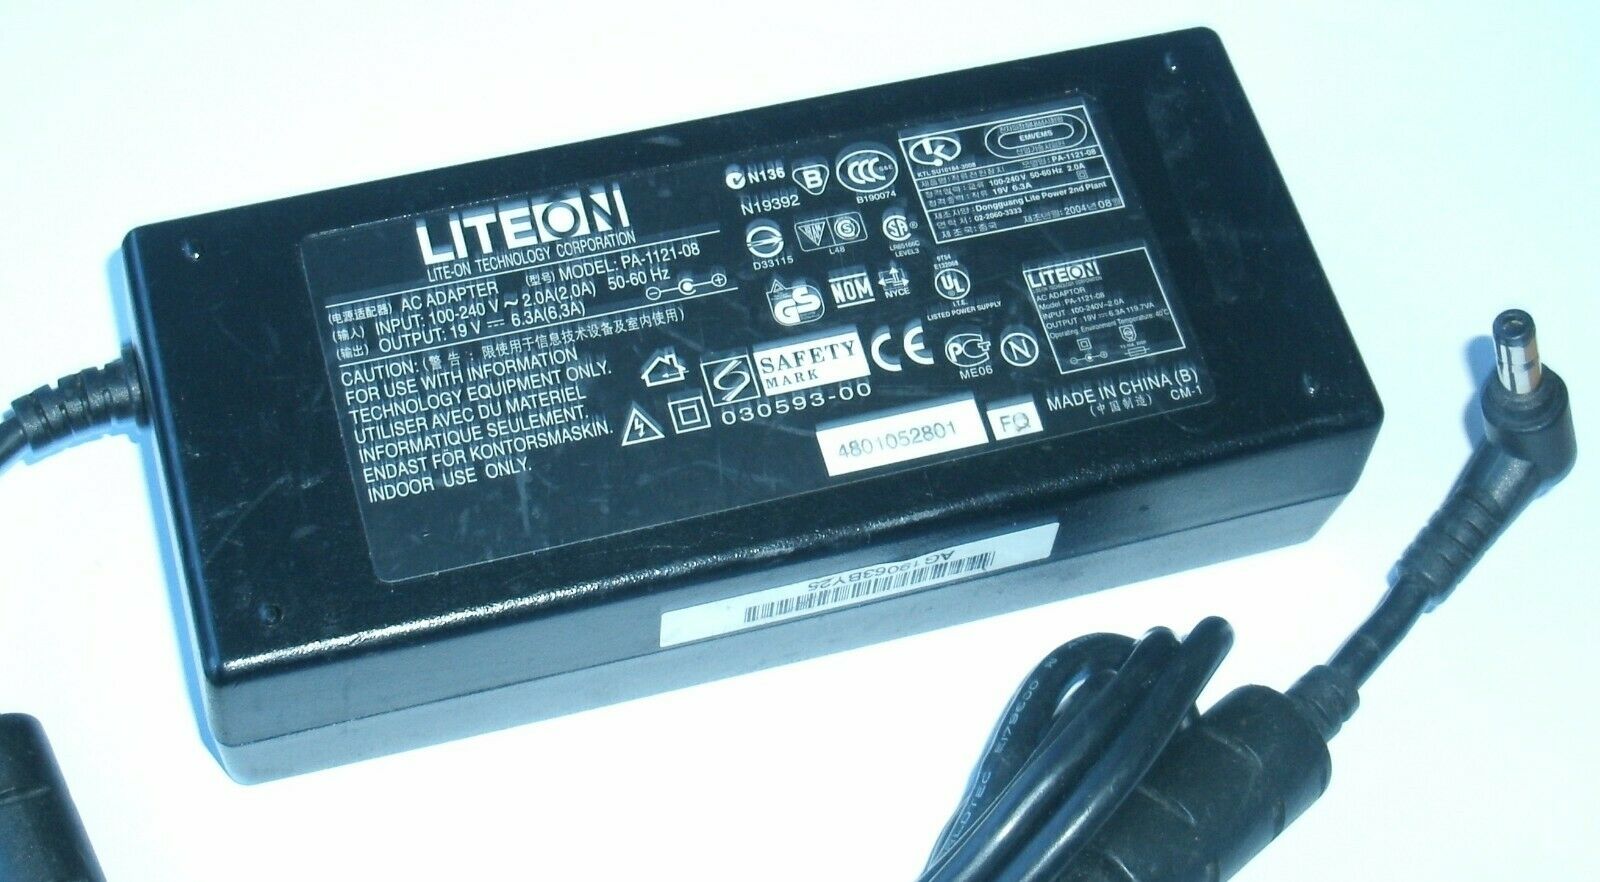 New LITEON PA-1121-08 19V 6.3A AC ADAPTER power charger with power cord Specification: Brand:LITE